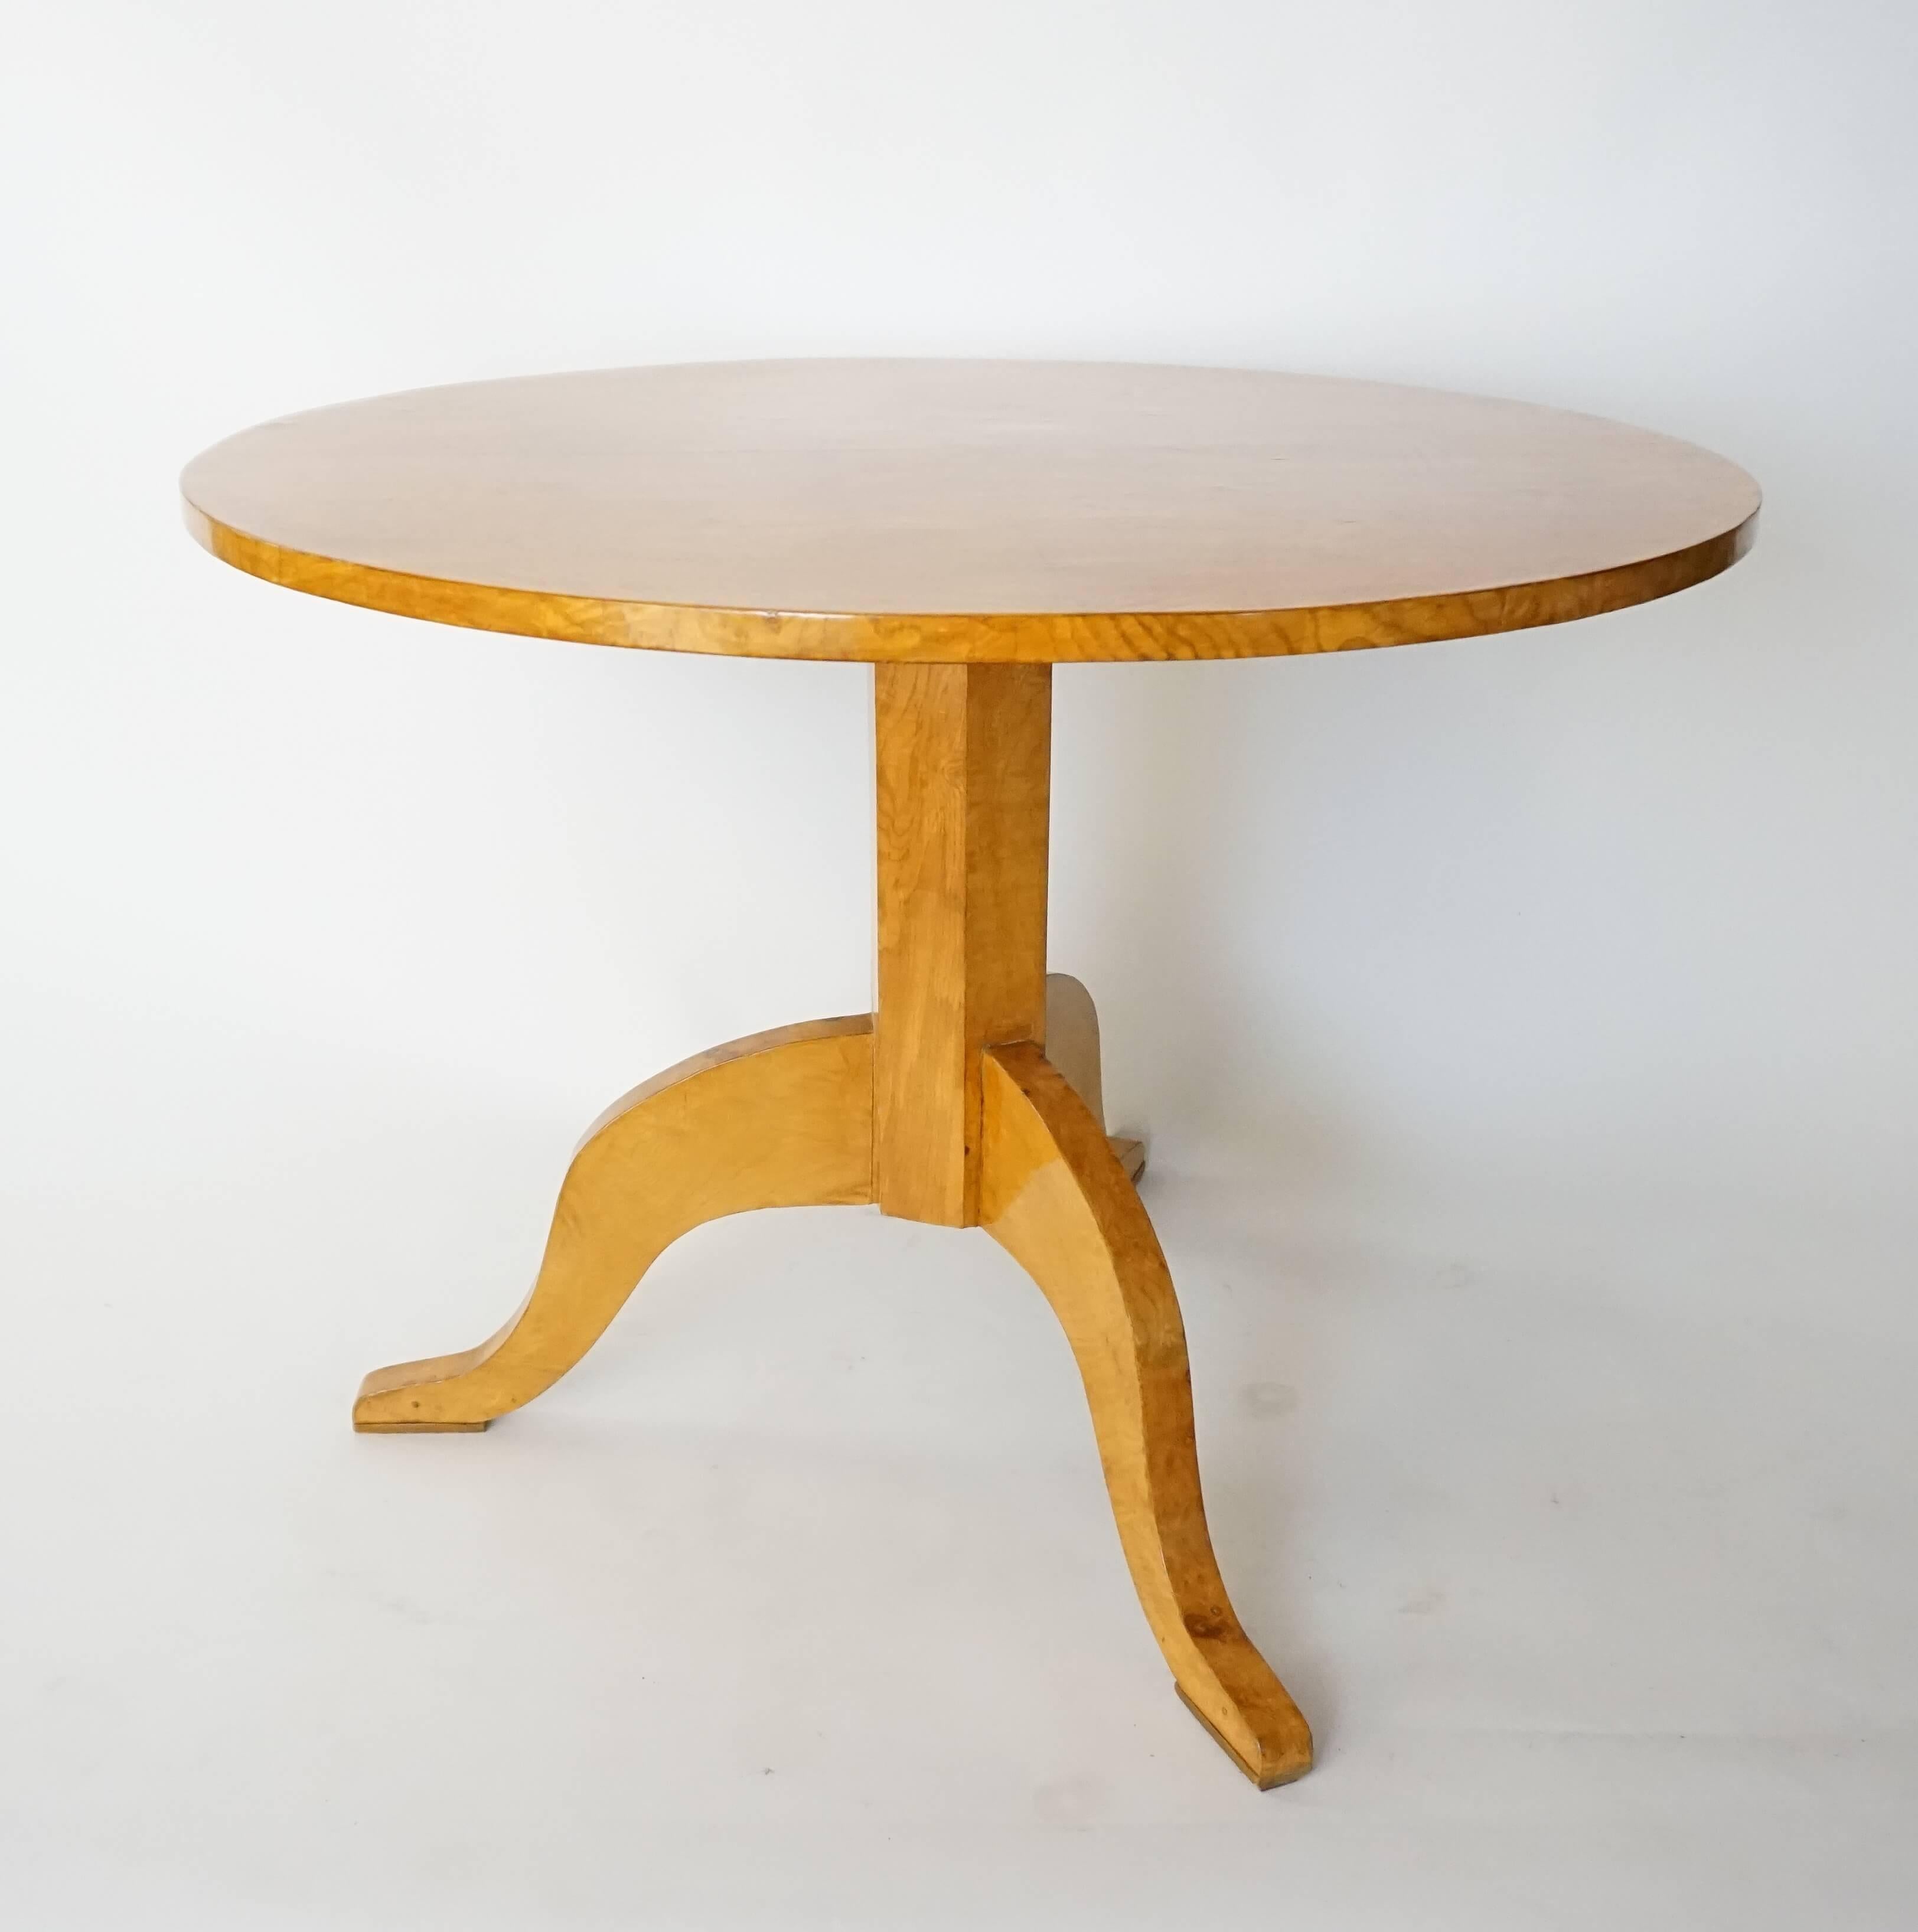 Early 20th century Swedish Karl Johan Style Biedermeier table bench-made of elegant clean design having burled golden birch root radiating veneers on round tilting-top, golden birch hexagonal pedestal, and three arched leg supports. Height when